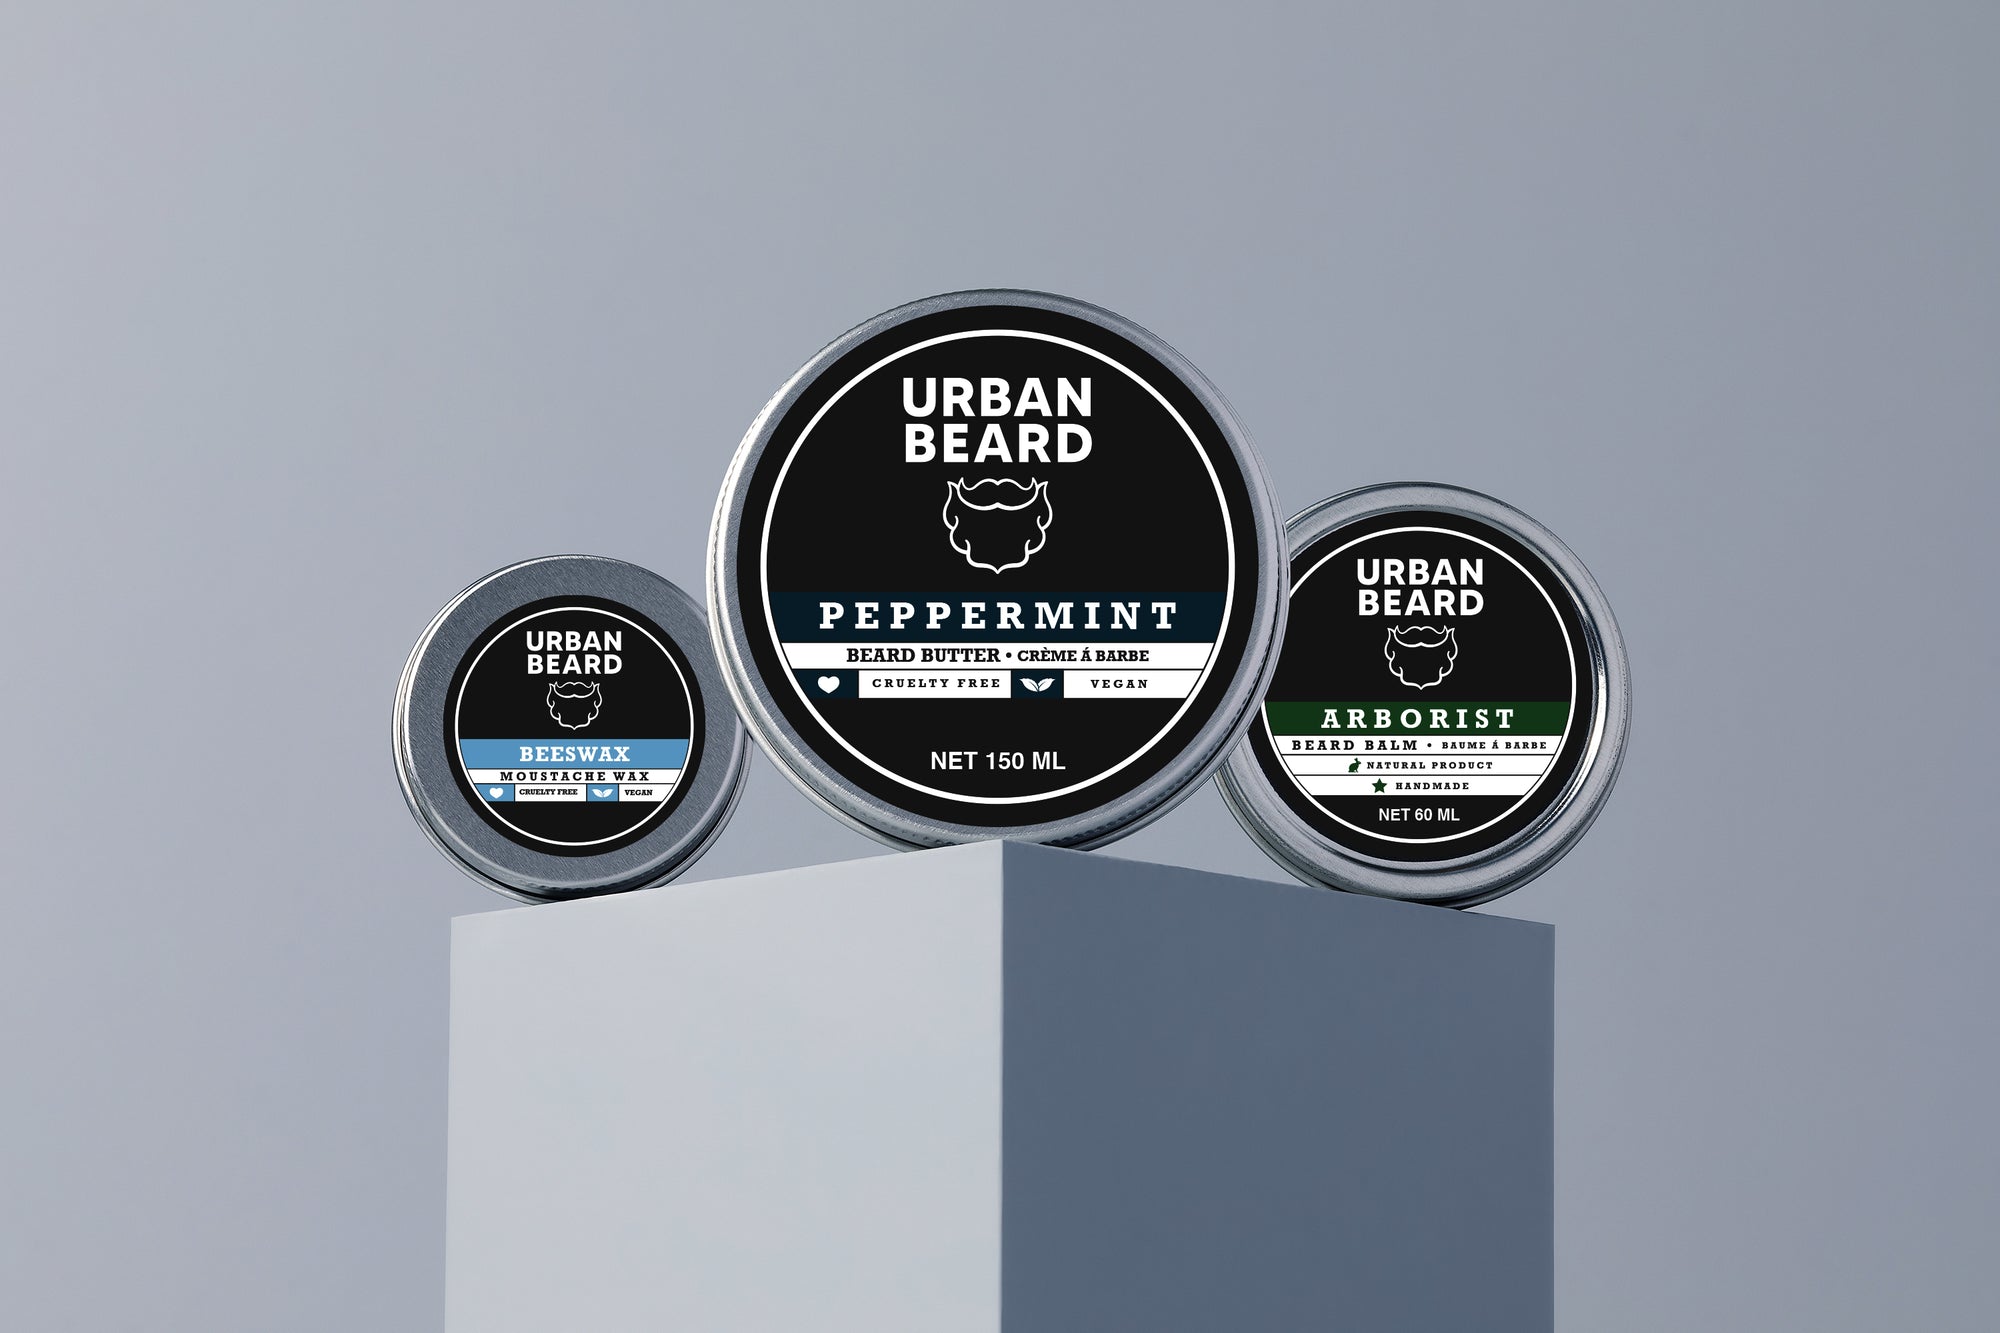 Beard Butter | Beard Balm | Moustache Wax | Urban Beard has the best beard products on the market to give you the healthiest, slickest looking beard around. Give us a try